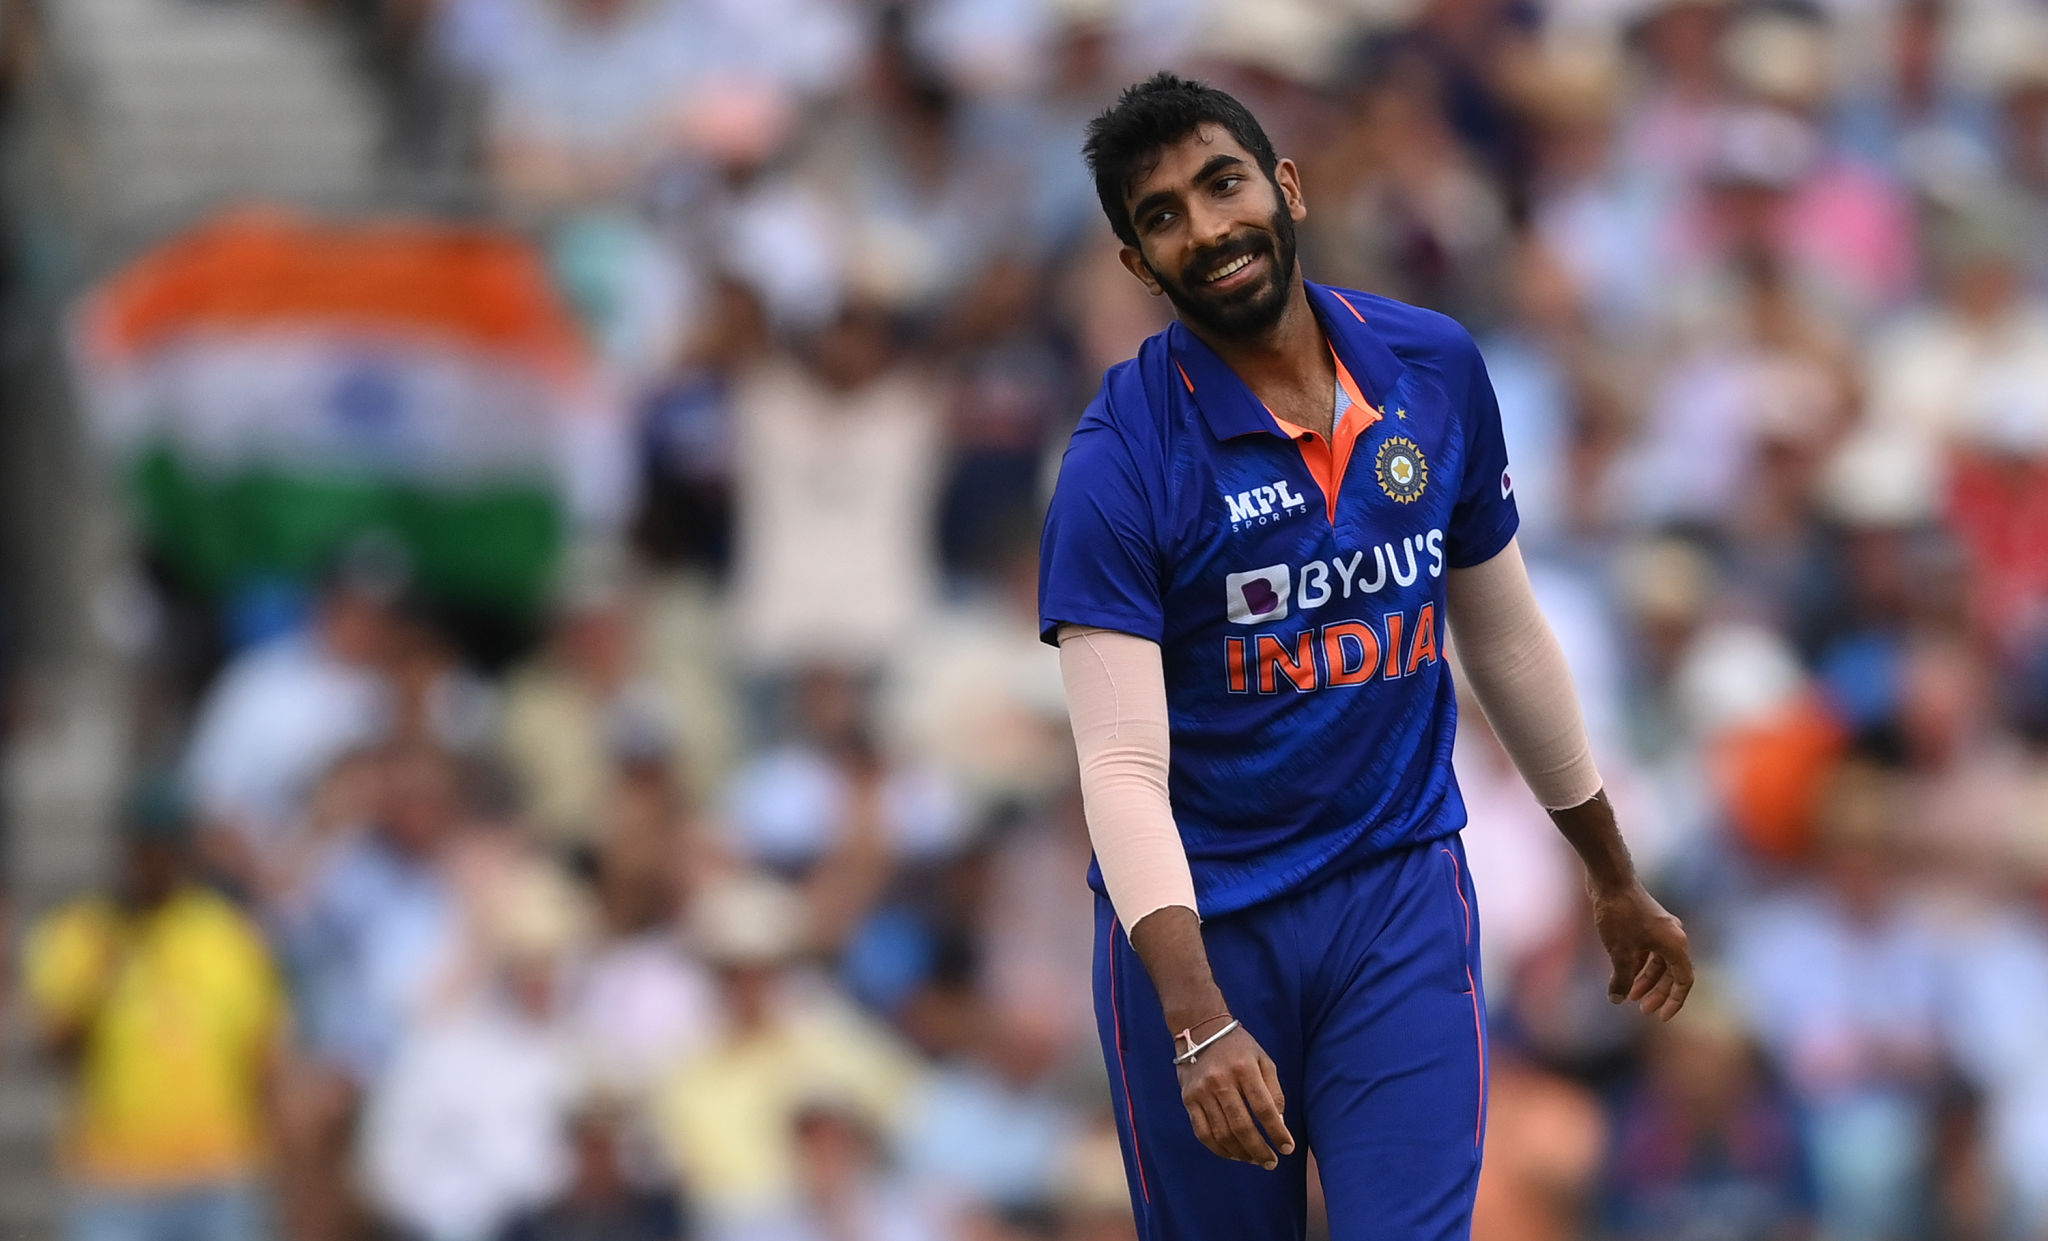 Jasprit Bumrah T20 WC: BCCI official says Jasprit Bumrah 'Recovering Well', likely to be available for T20 World Cup, Asia Cup 2022, Jasprit Bumrah Injury